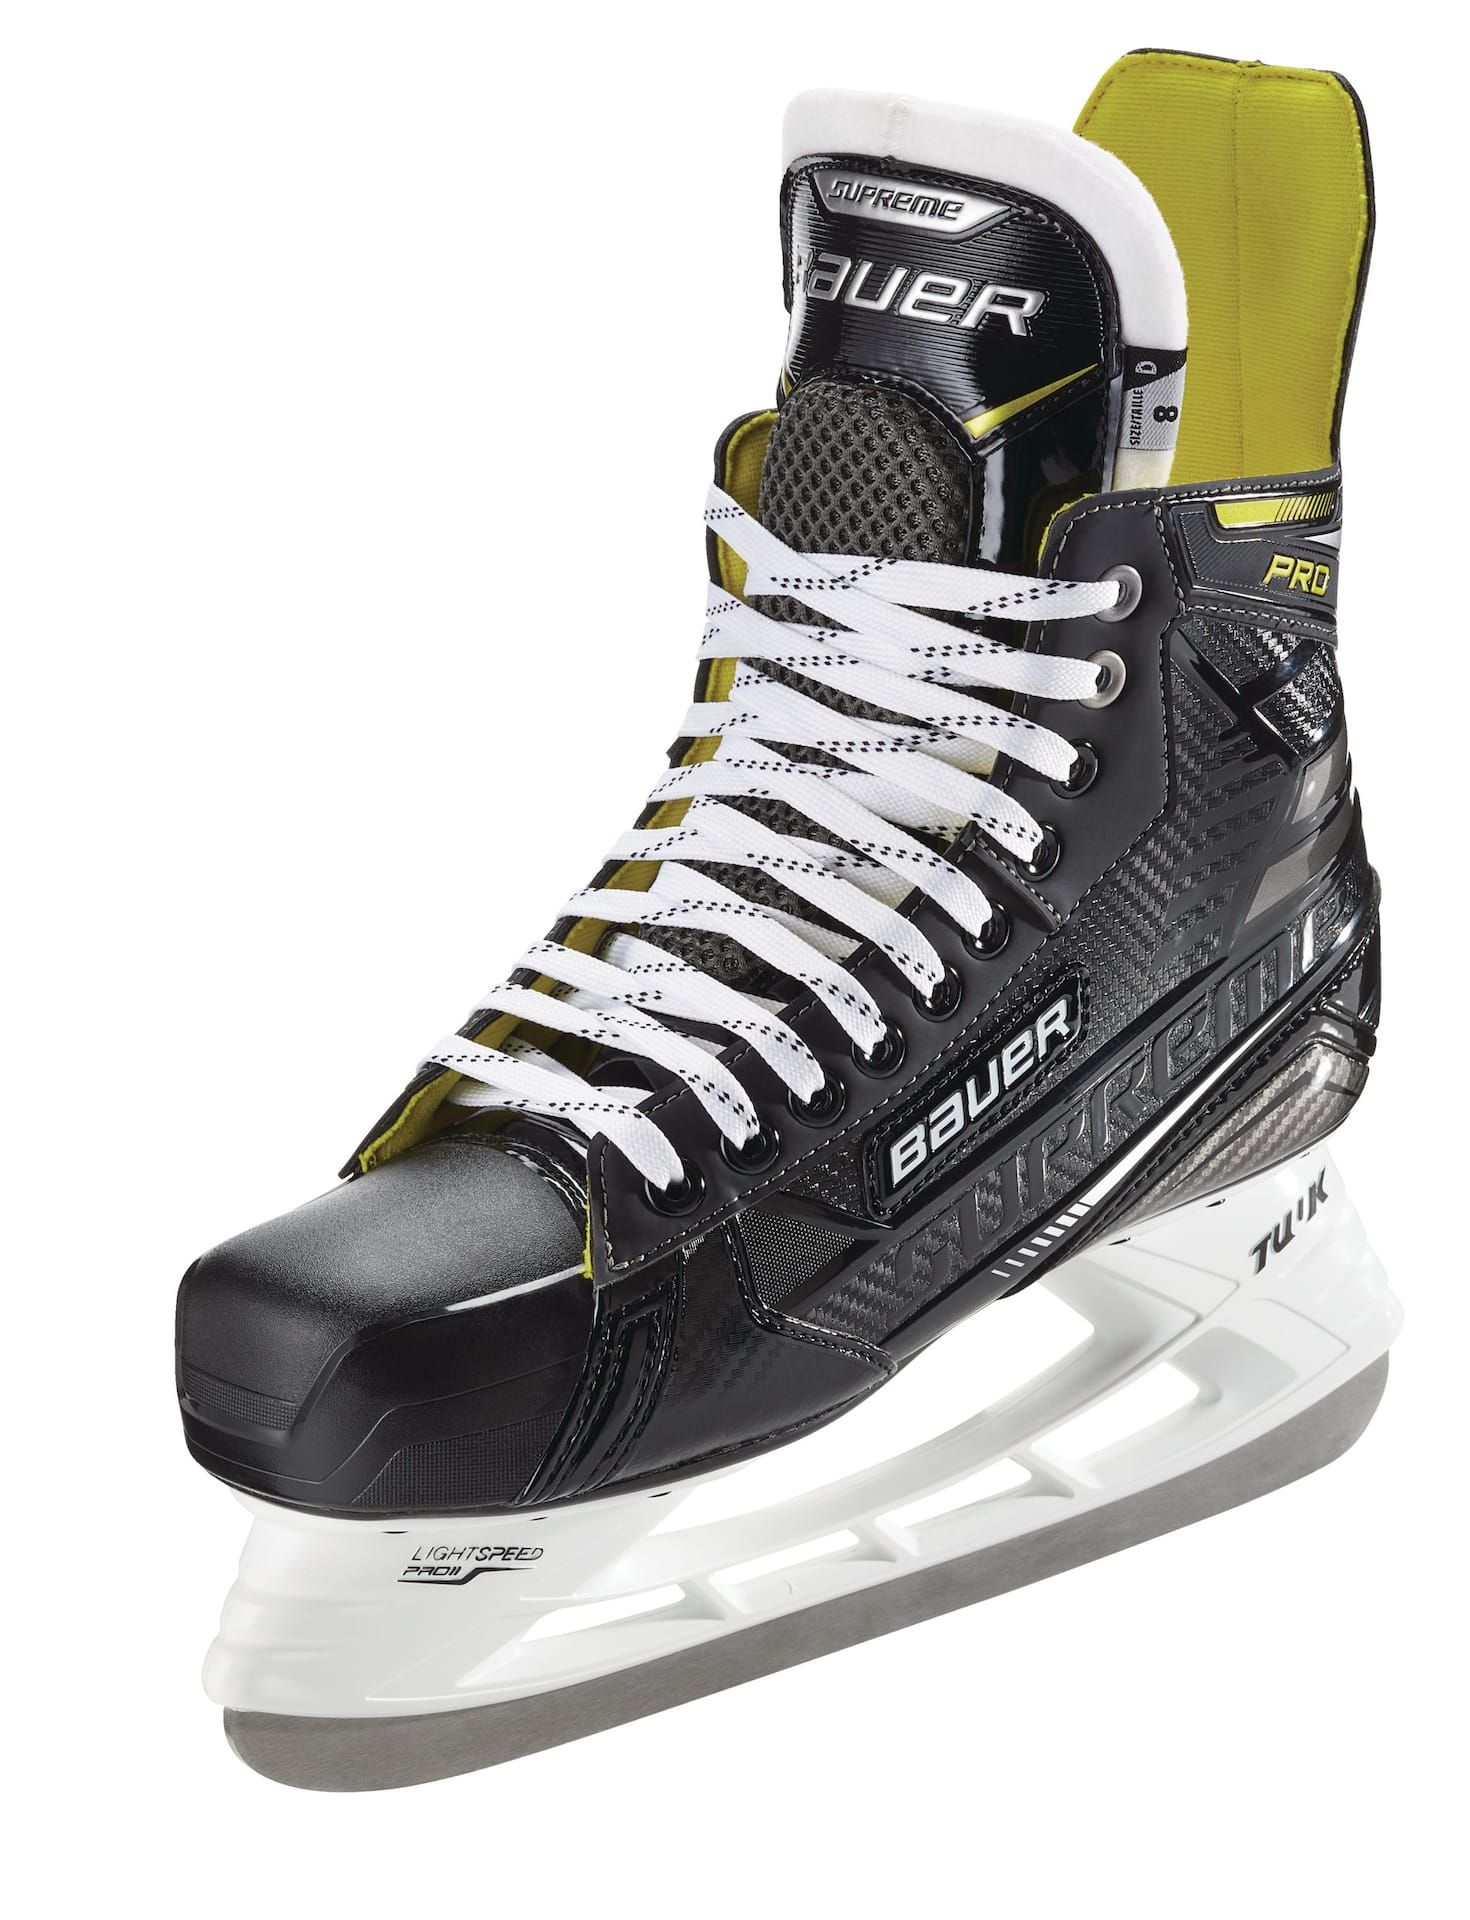 Bauer Supreme Pro Hockey Skates with Stainless Steel Blade, Senior Canadian Tire